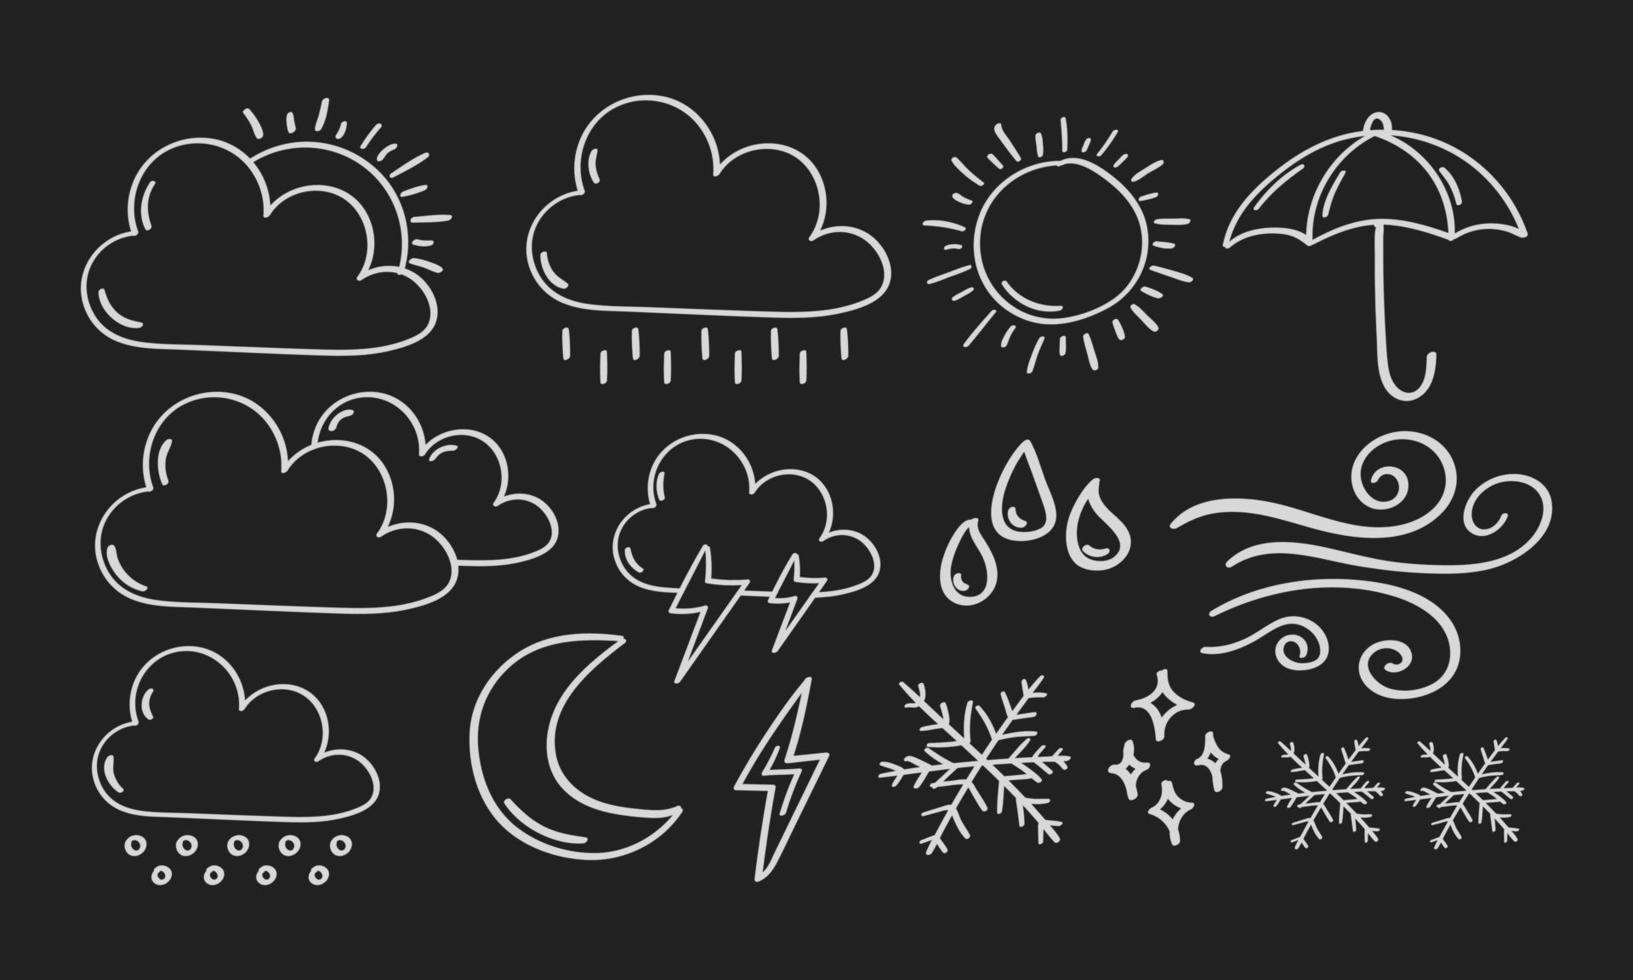 Hand drawn weather icon on chalkboard vector